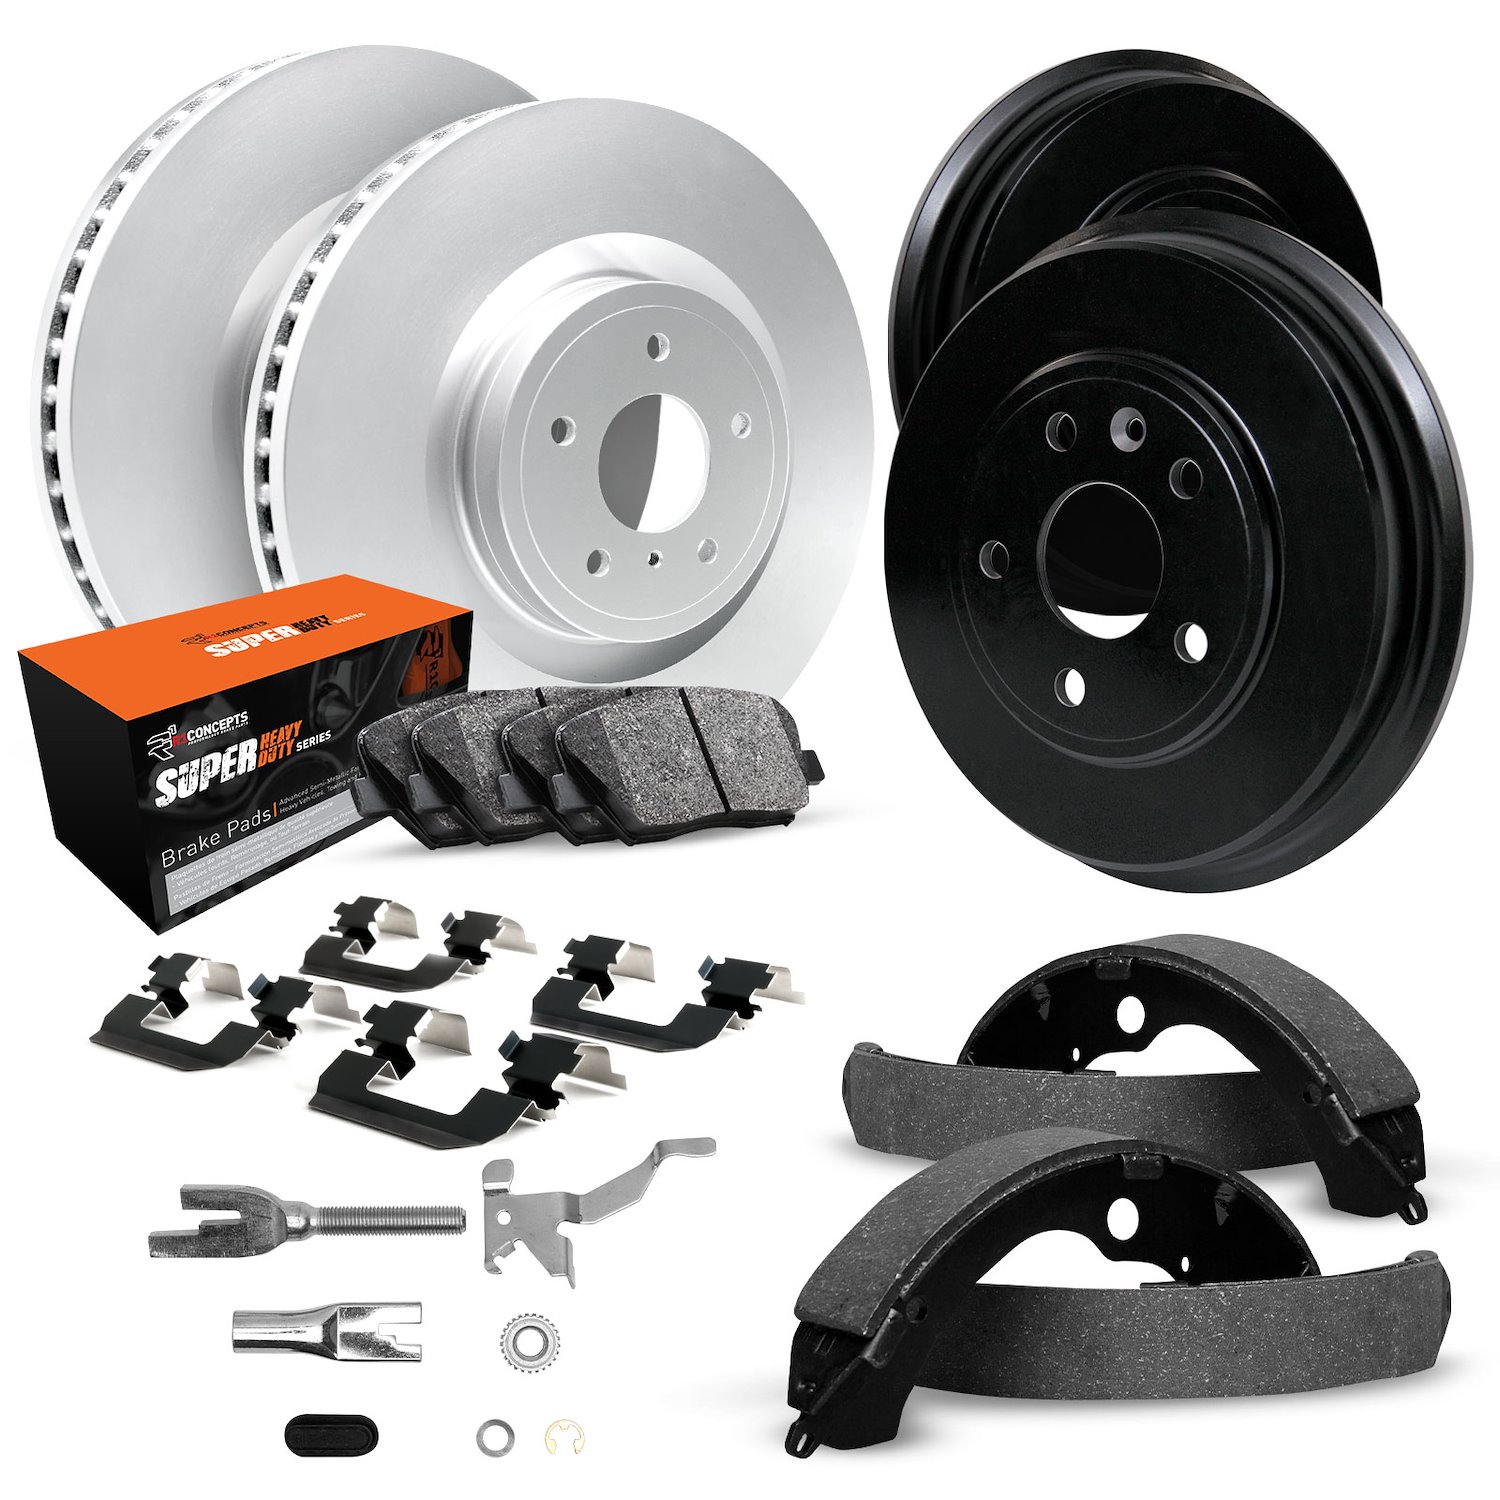 GEO-Carbon Brake Rotor & Drum Set w/Super-Duty Pads, Shoes, Hardware/Adjusters, 2005-2005 GM, Position: Front & Rear